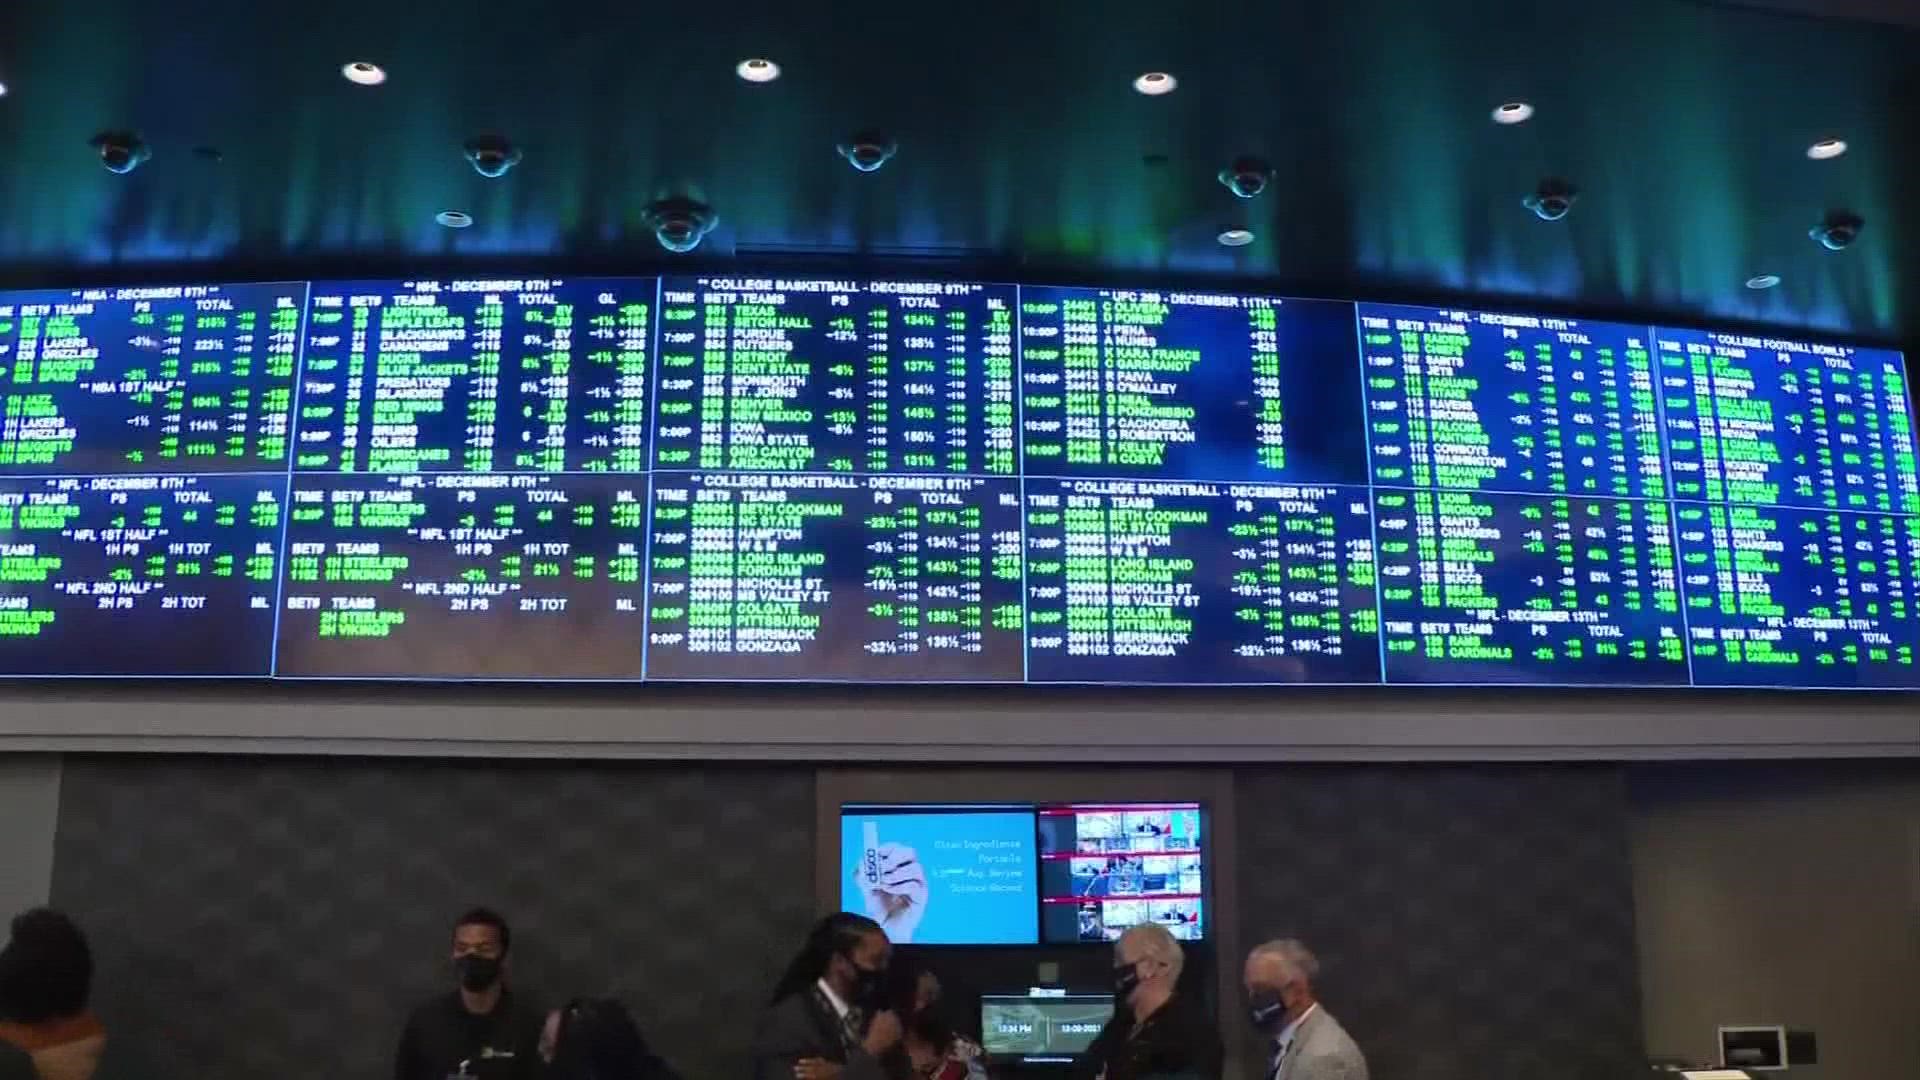 Sports betting becomes legal in Ohio Jan. 1, 2023.